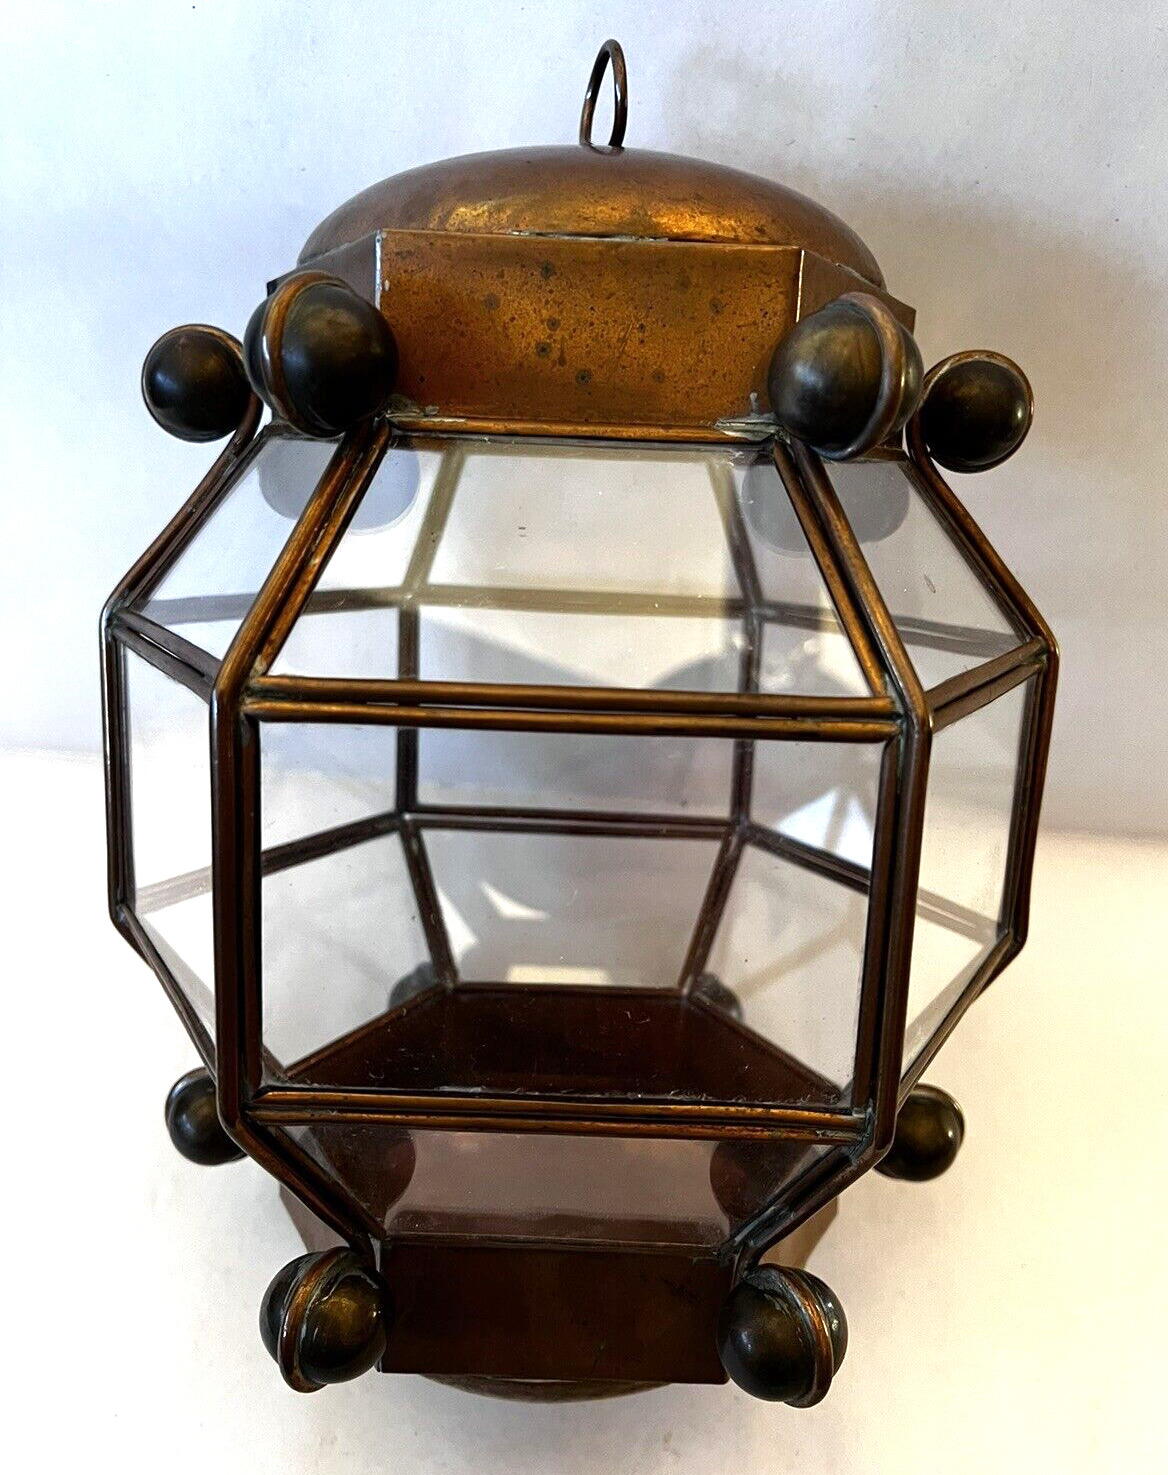 Scarce Signed 1940's Vintage Taxco Hector Aguilar Hexagonal Copper Lantern